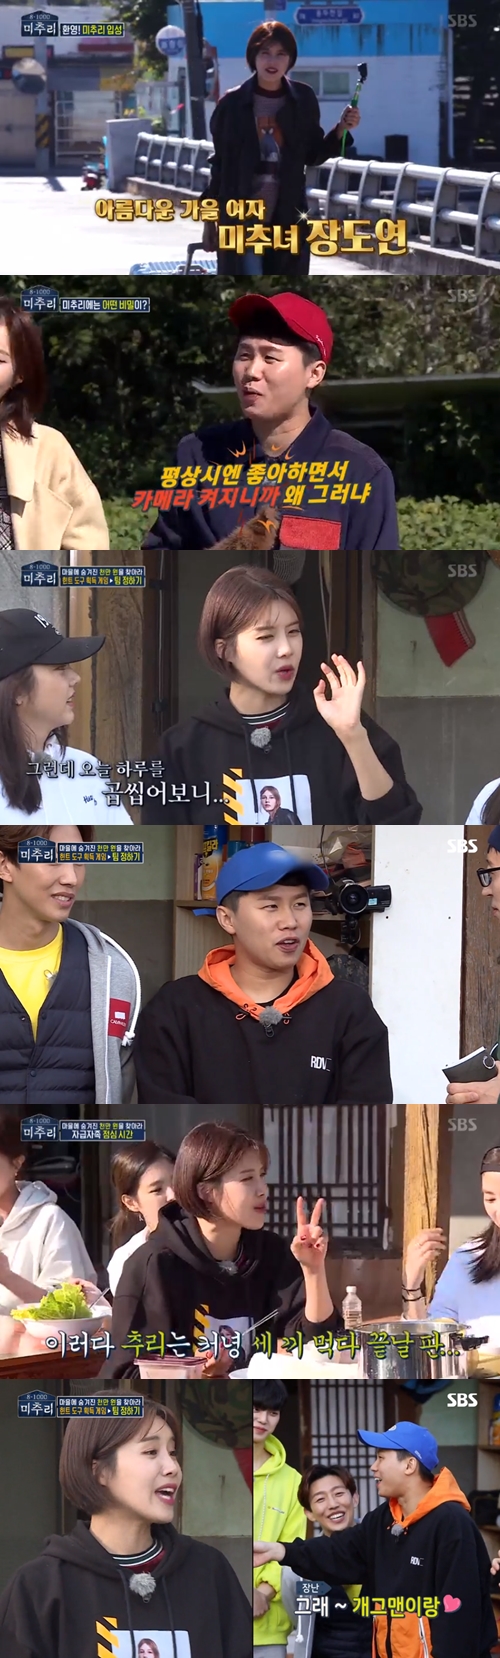 Michu and Jang Doyeon and Yang Se-heeong showed the merit of the On the 16th, SBS entertainment program Michu and 8 - 1000 (hereinafter referred to as Michu and) was shown members looking for hints for 10 million won hidden in the village.Eight members gathered in the village of Michu and the last time, Yoo Jae-seok, who appeared, declared, This place is thoroughly controlled, and declared, We must return unnecessary items to our solid life.Jenny affirmed, There is no item to return, and Yang Se-heeong quipped, Mr Jenny, you have to take the cuteness away.I didnt bring it because I didnt like getting married, Jang Doyeon said adamantly, and Yang Se-heeong responded, Isnt it a fart in a bag?The secrets about Michu and the village were revealed. They had to find 10 million won hidden for one night and two days.The members chose one different item for their isolation before entering the village, which was a hint tool that would be useful for finding 10 million won.Jenny was very impressed by the fact that 10 million won was hidden. There are four members, he said, laughing.The members who learned the secret of the village dispersed and started preparing for lunch. Kim Sang-ho and Jang Doyeon started to pick sweet potatoes.Jang Doyeon was alert for the 10 million won hint, and found a questionable red stone. Kang Ki-young also found a red stone while fishing and quickly picked it up.His previous choice was a hammer, and he used a hammer to break a red stone and get a hint.The dinner members started a hint tool acquisition game. Yoo Jae-seoks first question was, Ive dated an entertainer.When the members rebelled, Yoo Jae-seok shouted, I am not interested in other peoples love affairs.Jang Doyeon replied yes, while Son Dam-bi chastised him, saying dont lie; then Jang Doyeon said: Its not on the gag side.I heard a little bit before, and the nickname is Min, Yang Se-heeong said.When asked I want to go to the house, all members except Yang Se-heeong and Kang Ki-young answered yes.Im Soo-hyang said, Its fun, I want to go to the house, Yang Se-heeong said, Jang Doyeon does not want to go to the house, but sits down to fart.Eventually, Songgang - Kang Ki-young - Im Soo-hyang - Jenny teamed up, Yang Se-hyeong - Kim Sang-ho - Jang Doyeon - Son Dam-bi teamed up.The first event was Salim Volleyball; Jenny and Im Soo-hyang showed off an unexpected sharp serve.On the other hand, Jang Doyeon and Son Dam-bi failed to turn one over to the net; in particular, Jang Doyeon blew the ball over the roof and emanated a fuss.So Son Dam-bi threw out the basin and was irritated.Yang Se-heeong and Jang Doyeon emanated a tit-for-tat chemie from the appearance; Yang Se-heeong continued the fart attack on Jang Doyeon.Jang Doyeon also hit back and laughed.The two, who have been breathing for a long time in comedy programs, have also made viewers happy with their constant combination in Michu and.Photo SBS broadcast screen capture